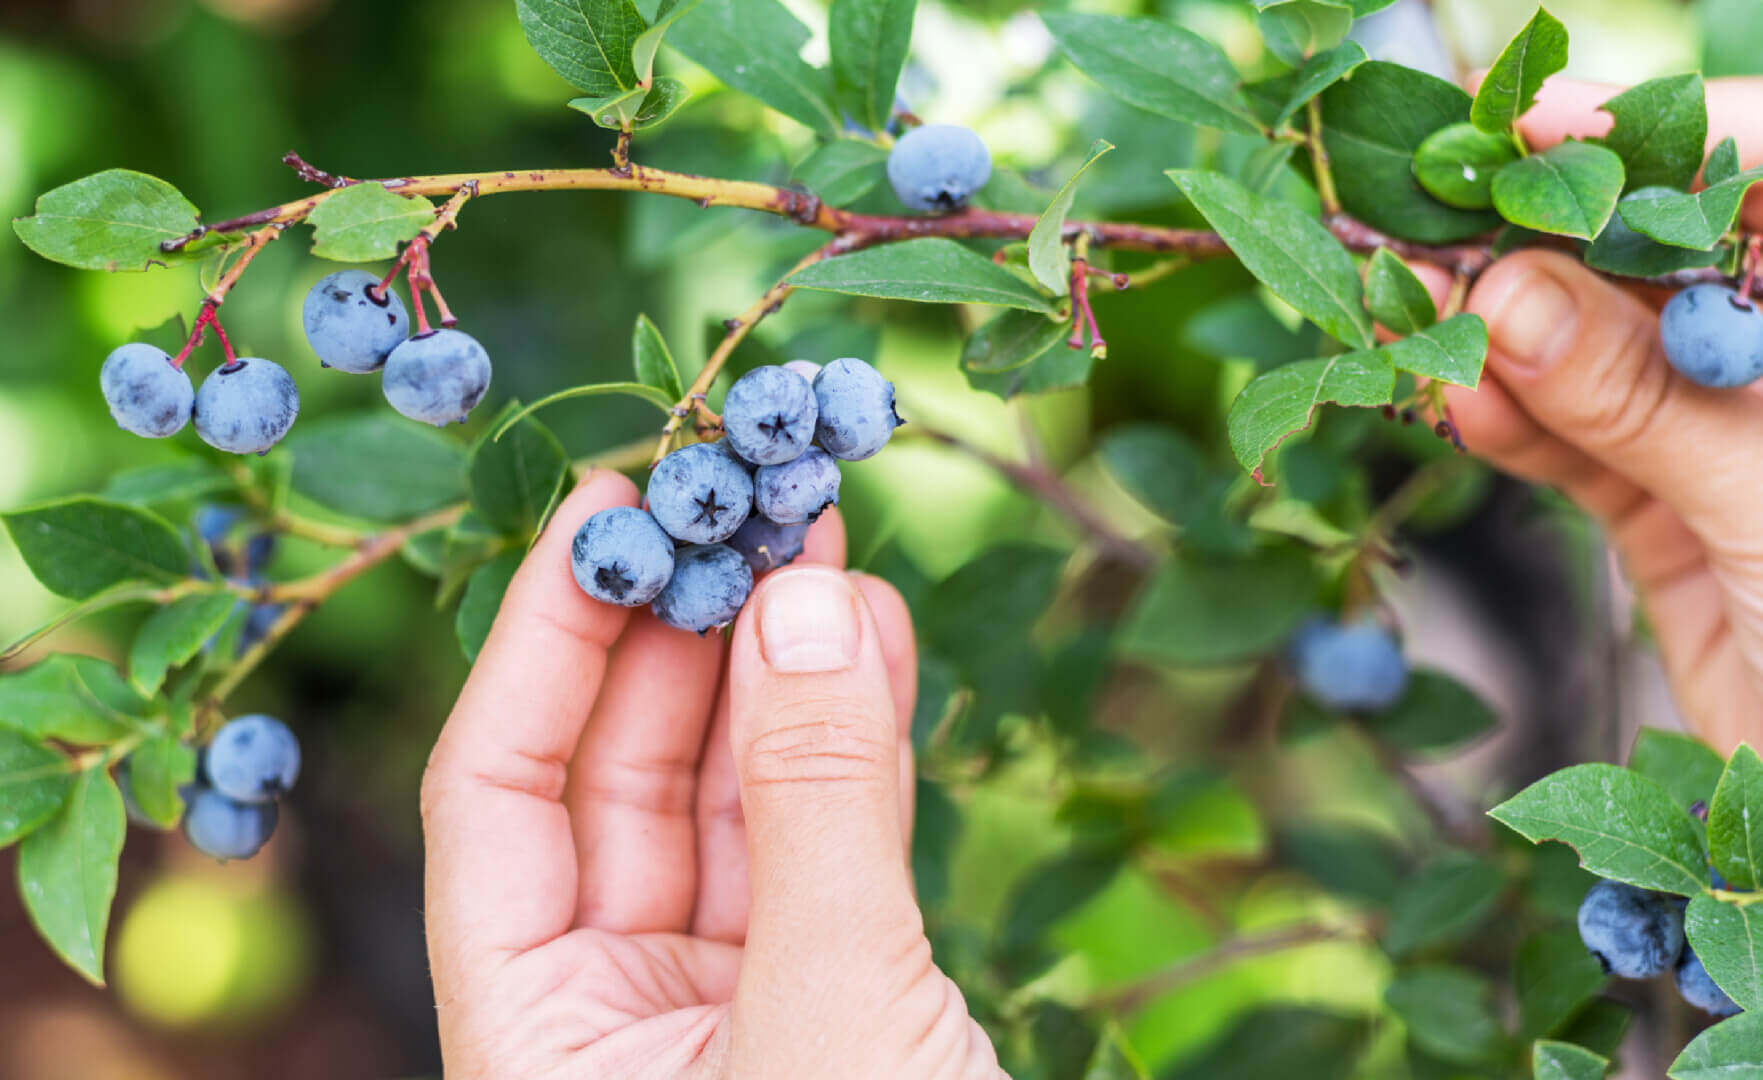 Are Blueberries Good for Dogs?